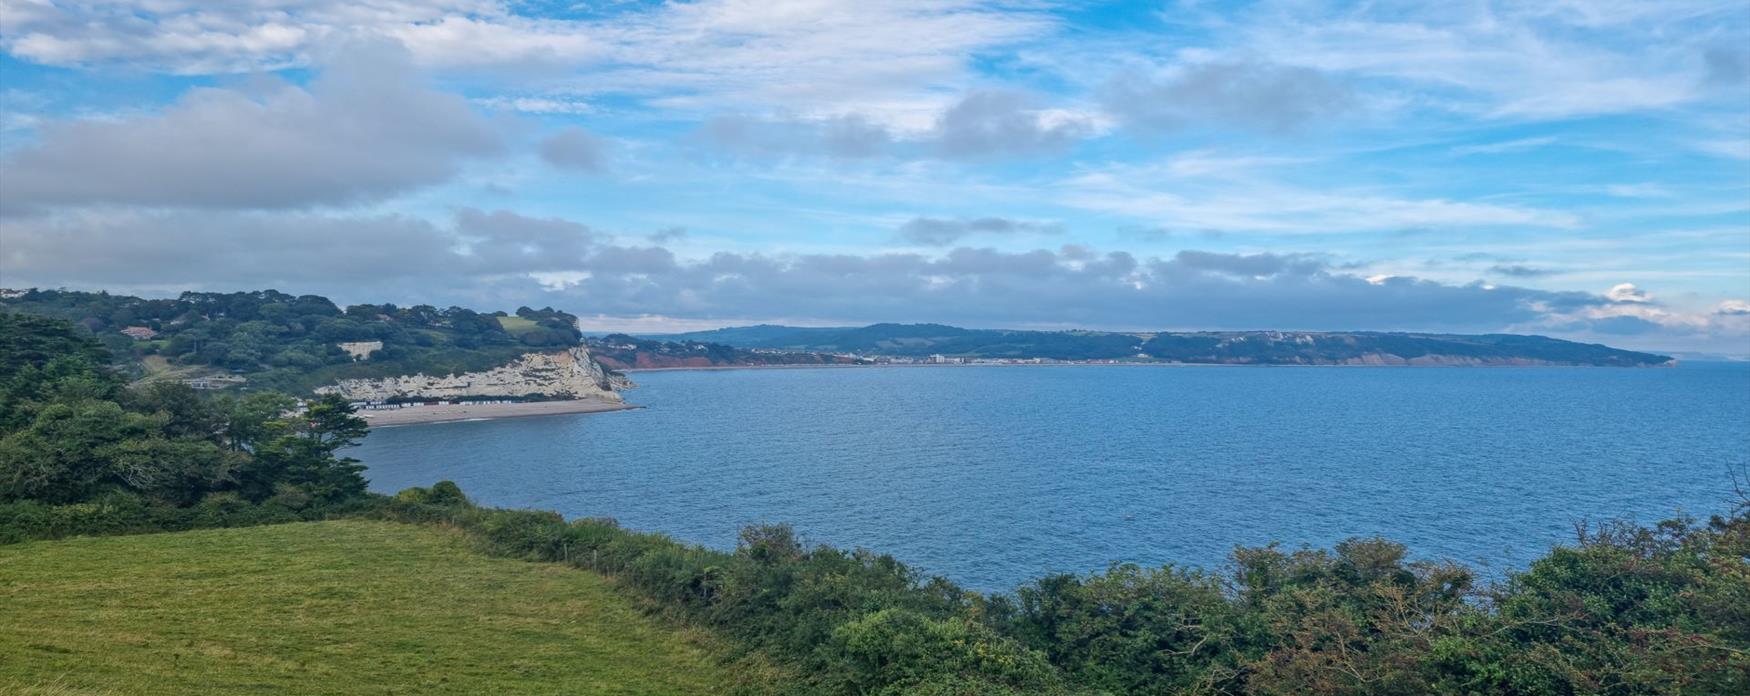 A panoramic view of the Jurassic Coast from Beer to Branscombe. The bright sparkling blue sea dominates the right side of the image, with the sweeping cliffs along the left side coming round in a semi-circle to the right side. The colours of the cliff change from white, to red, to golden with grassy green caps.